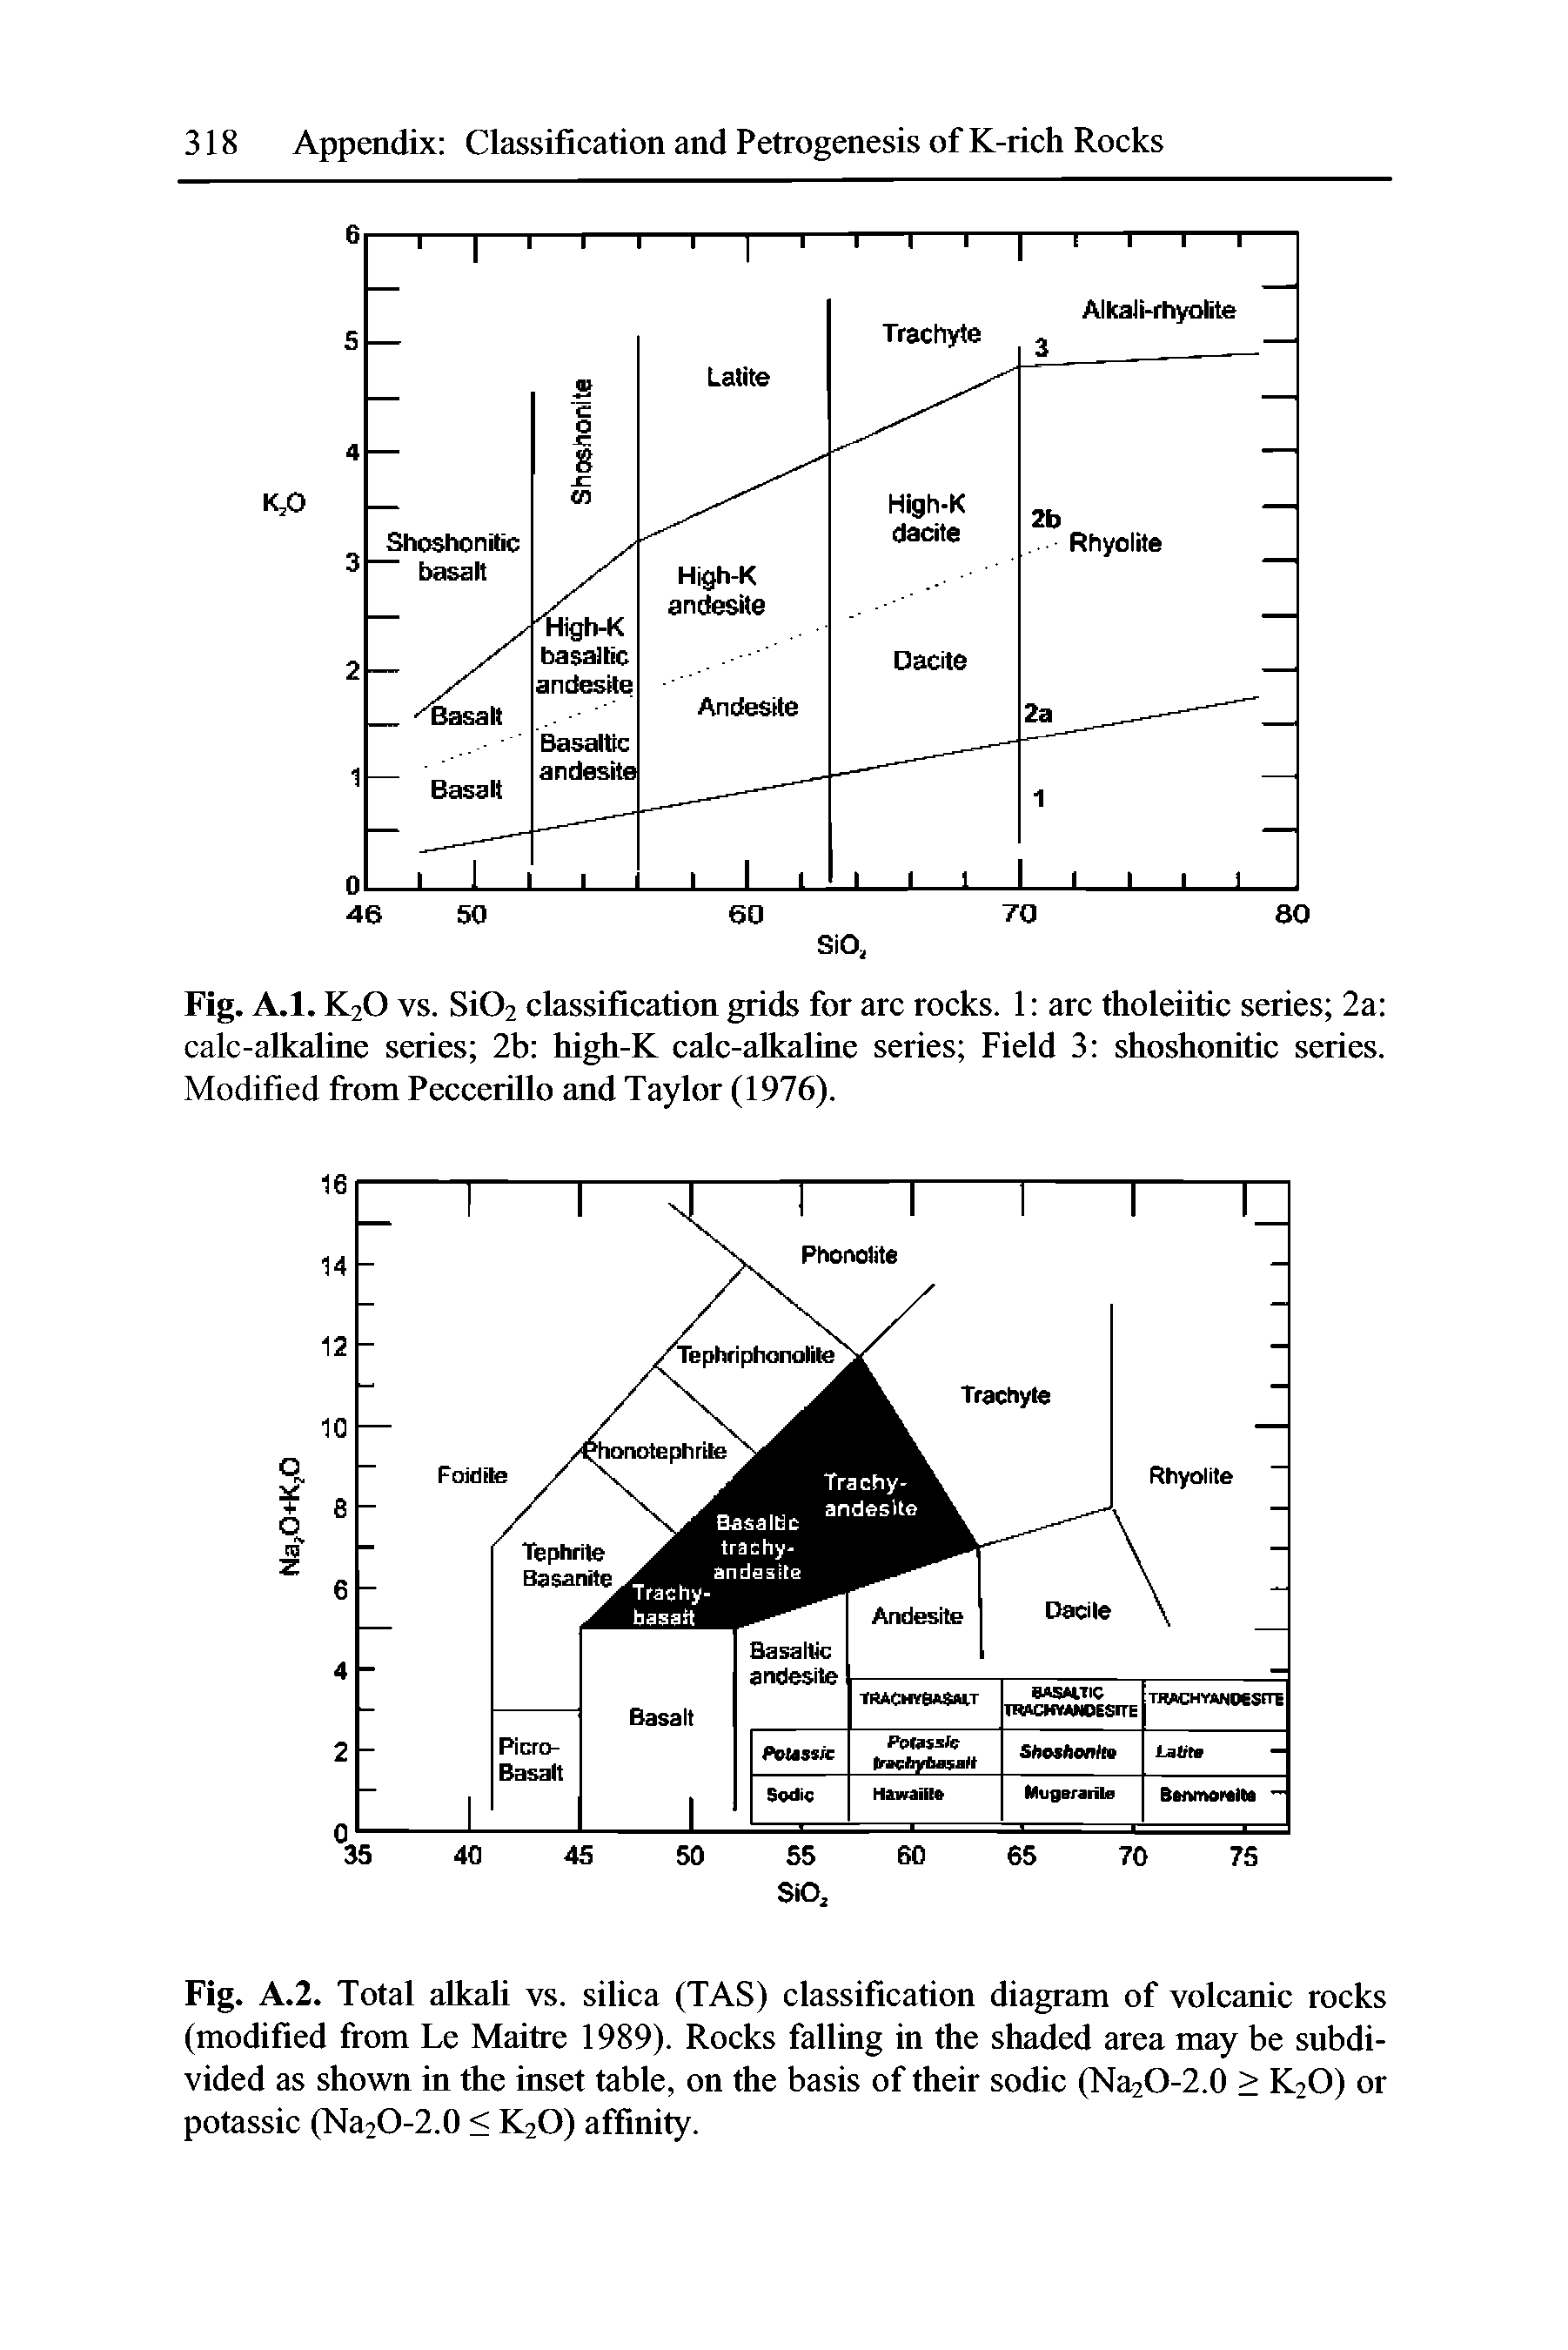 Fig. A.2. Total alkali vs. silica (TAS) classification diagram of volcanic rocks (modified from Le Maitre 1989). Rocks falling in the shaded area may be subdivided as shown in the inset table, on the basis of their sodic (Na2O-2.0 > K20) or potassic (Na2O-2.0 < K20) affinity.